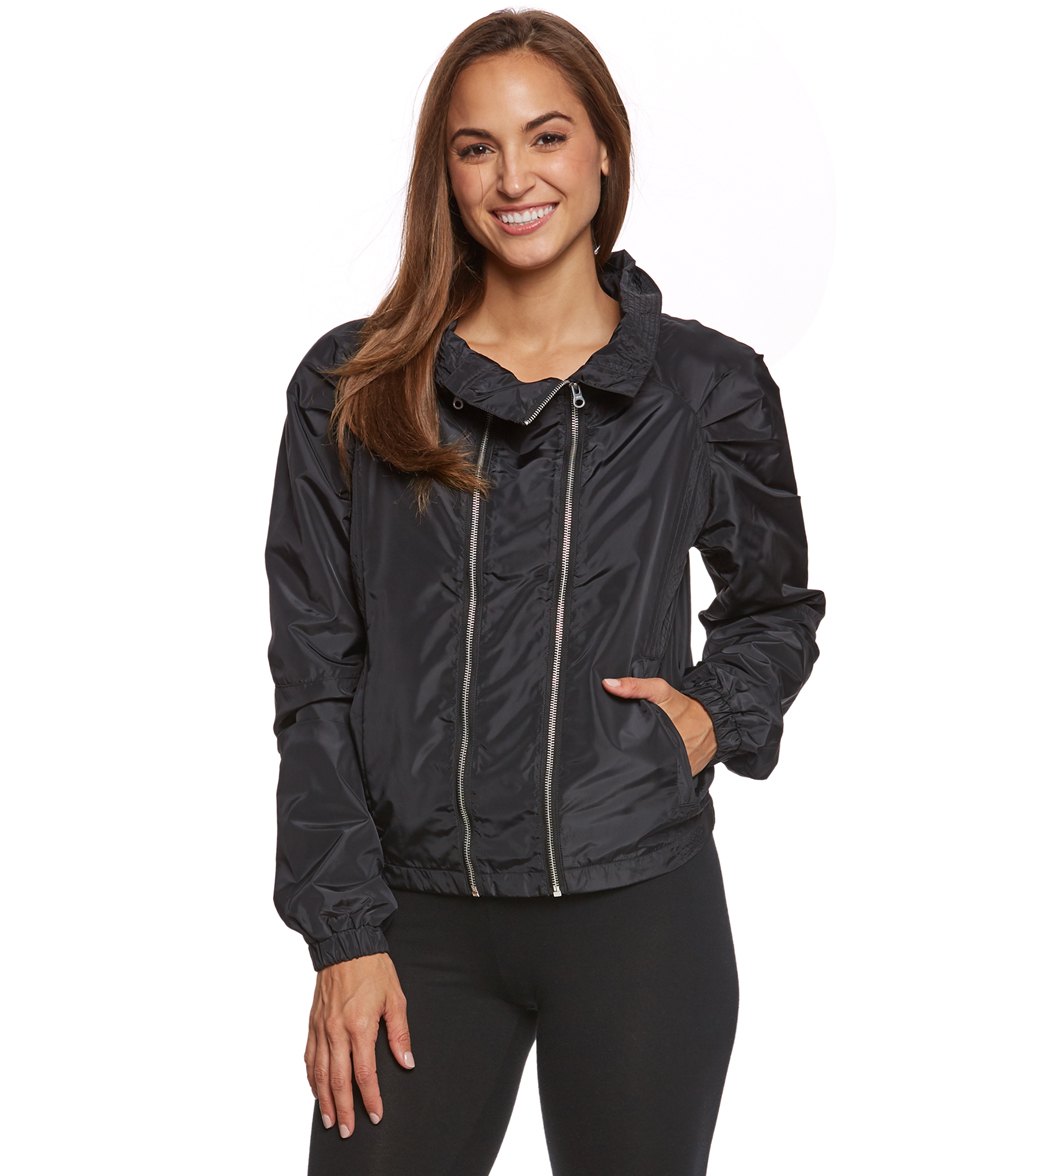 Lorna Jane Women's Authentic Active Jacket - Black Small Polyester - Swimoutlet.com